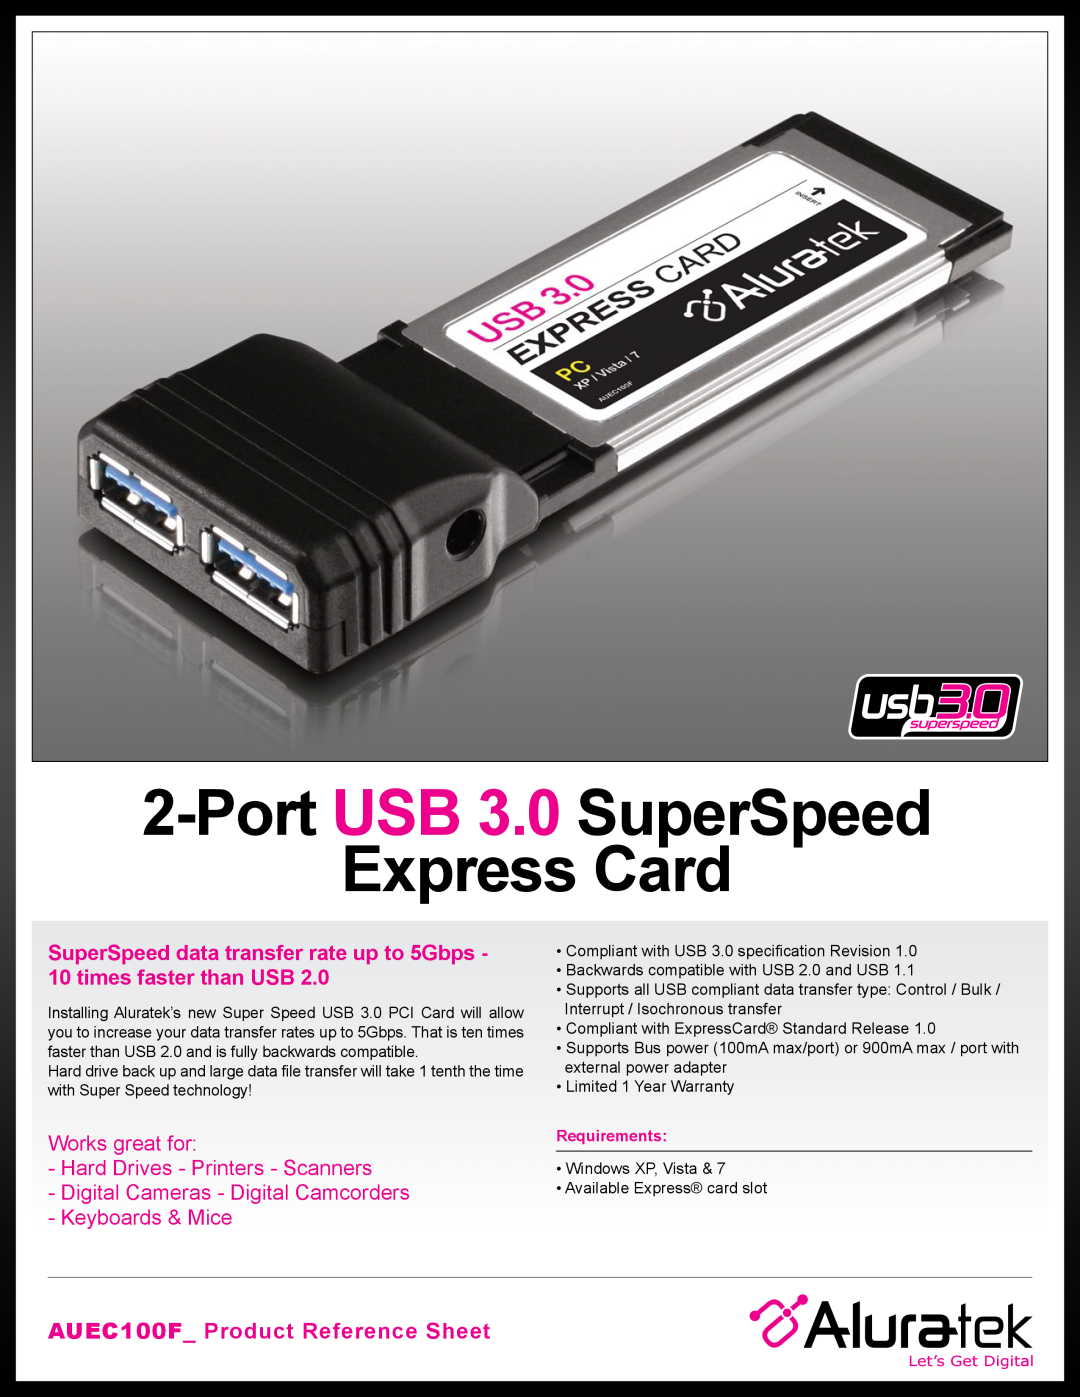 Aluratek warranty Port USB 3.0 SuperSpeed Express Card, AUEC100F Product Reference Sheet, Requirements 